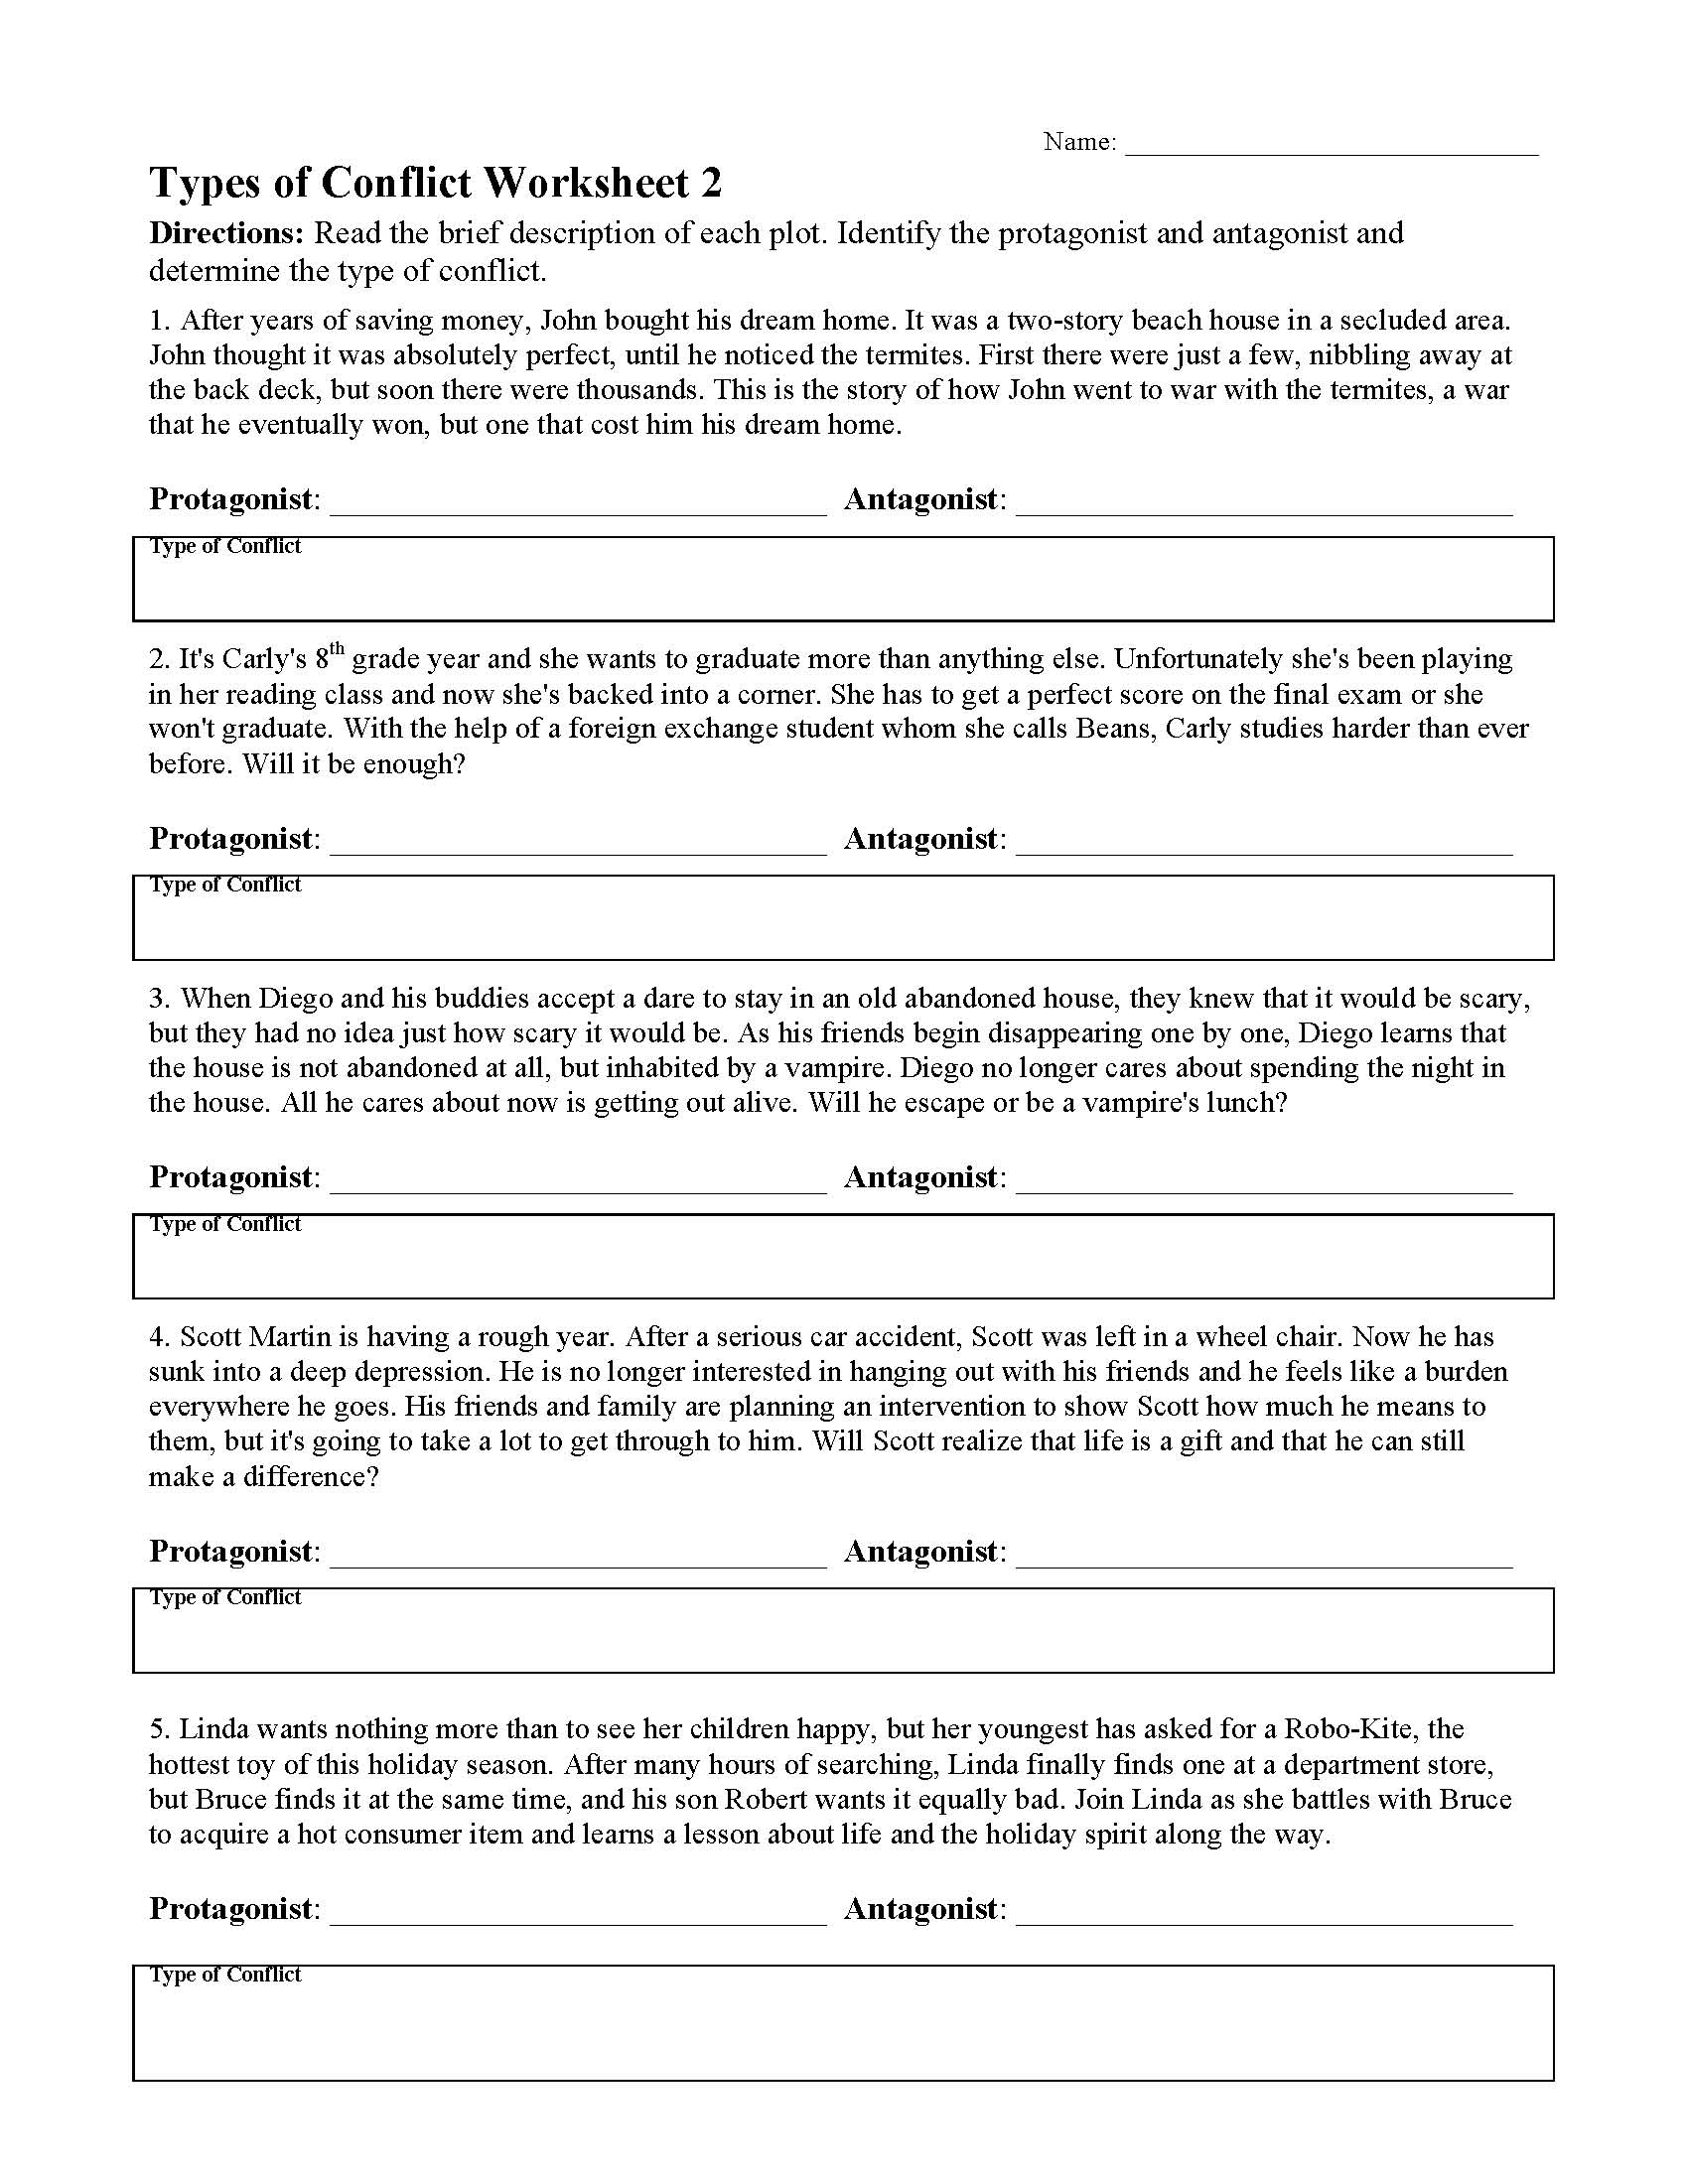 Types of Conflict Worksheet 11  Reading Activity With Regard To Types Of Conflict Worksheet